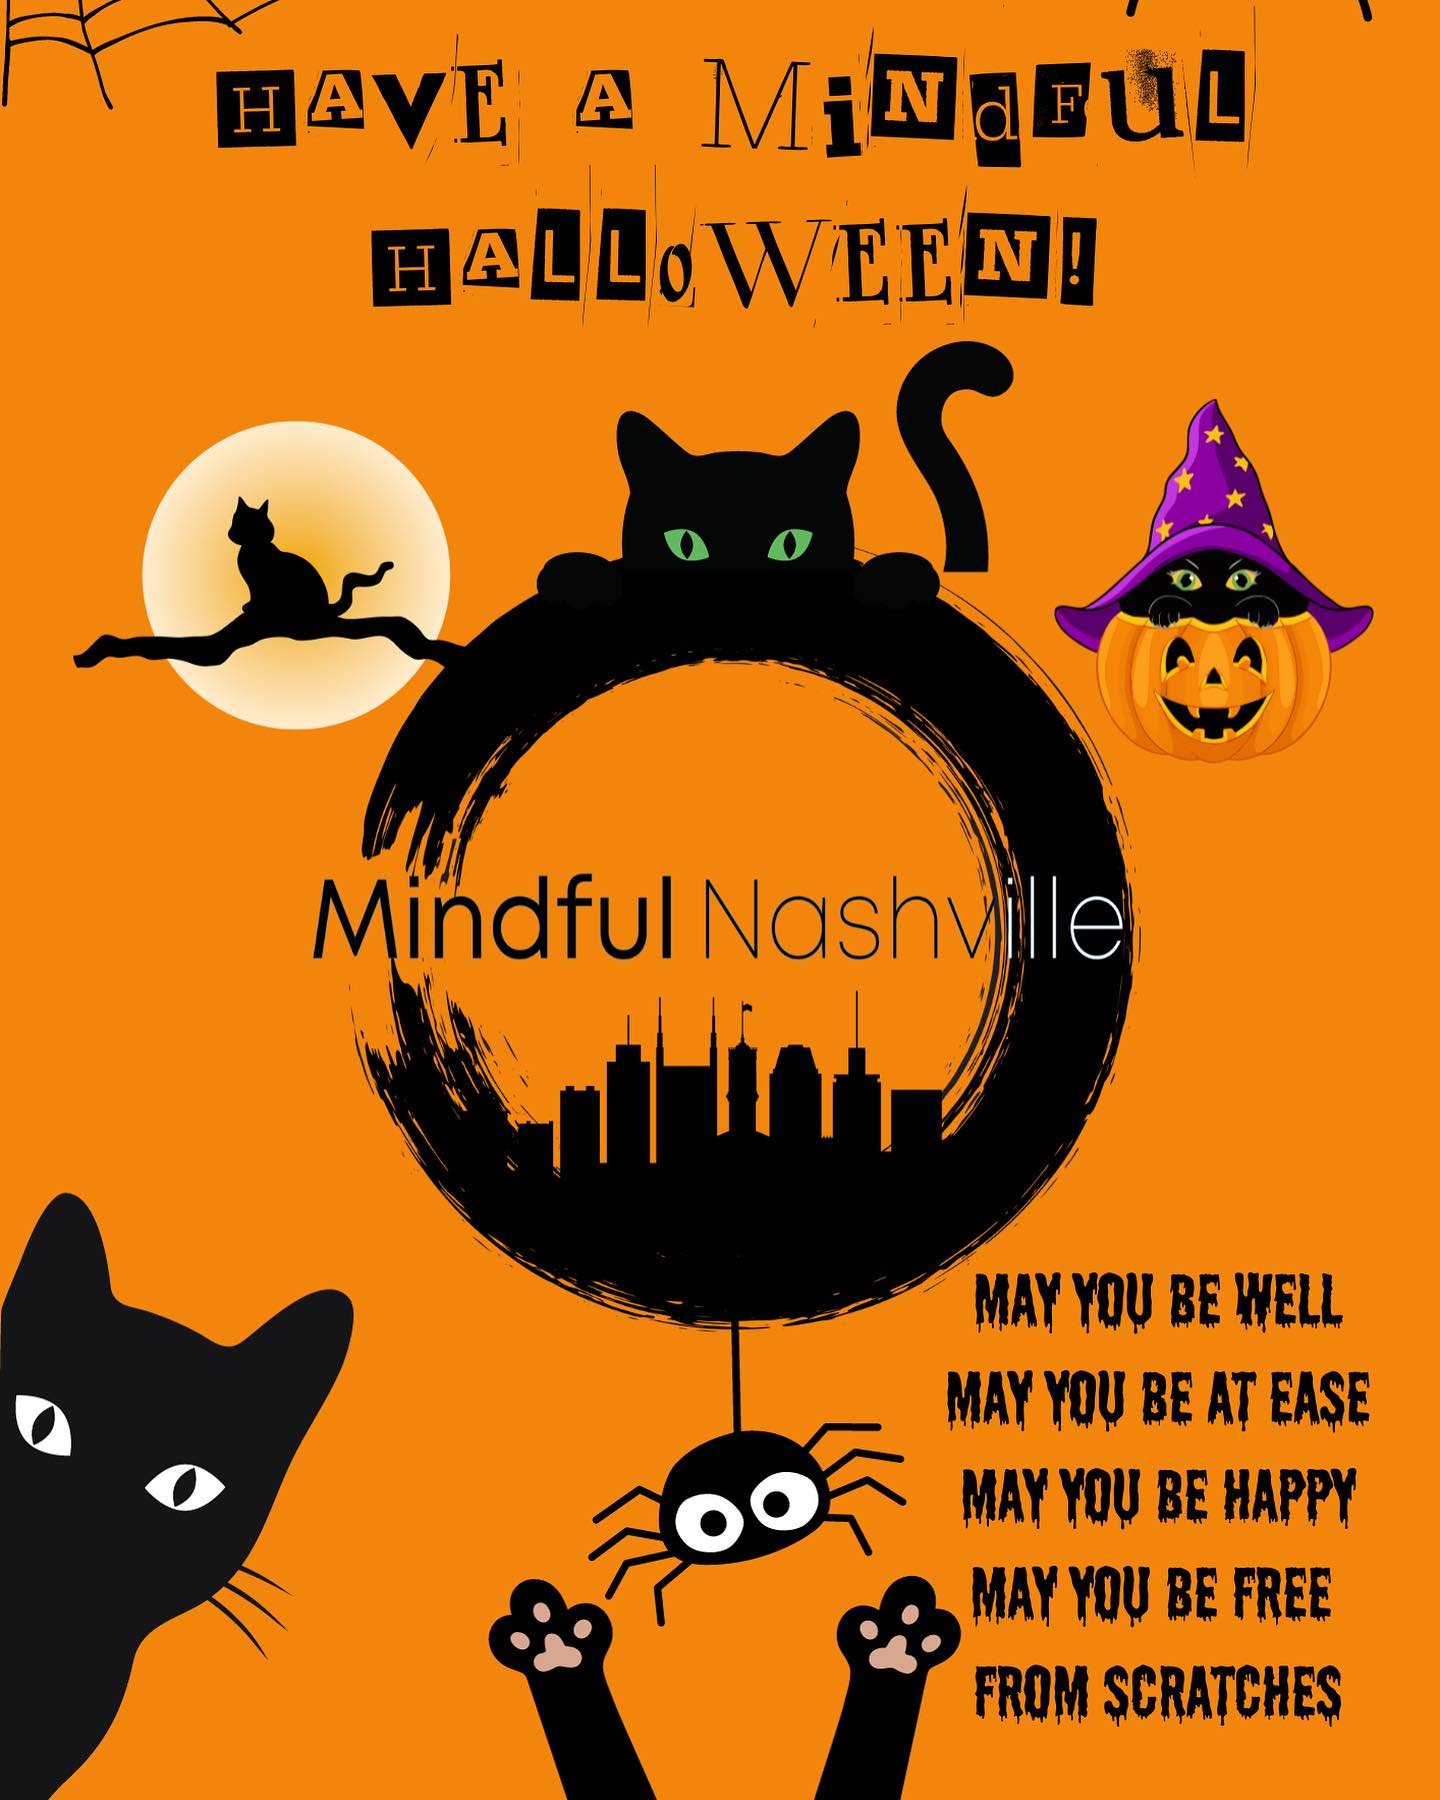 May you all have a wonderfully mindful Halloween, free from scratches 😋❤️🤗🙏 May you be filled with ease and joy and lots of organic cane sugar based treats!